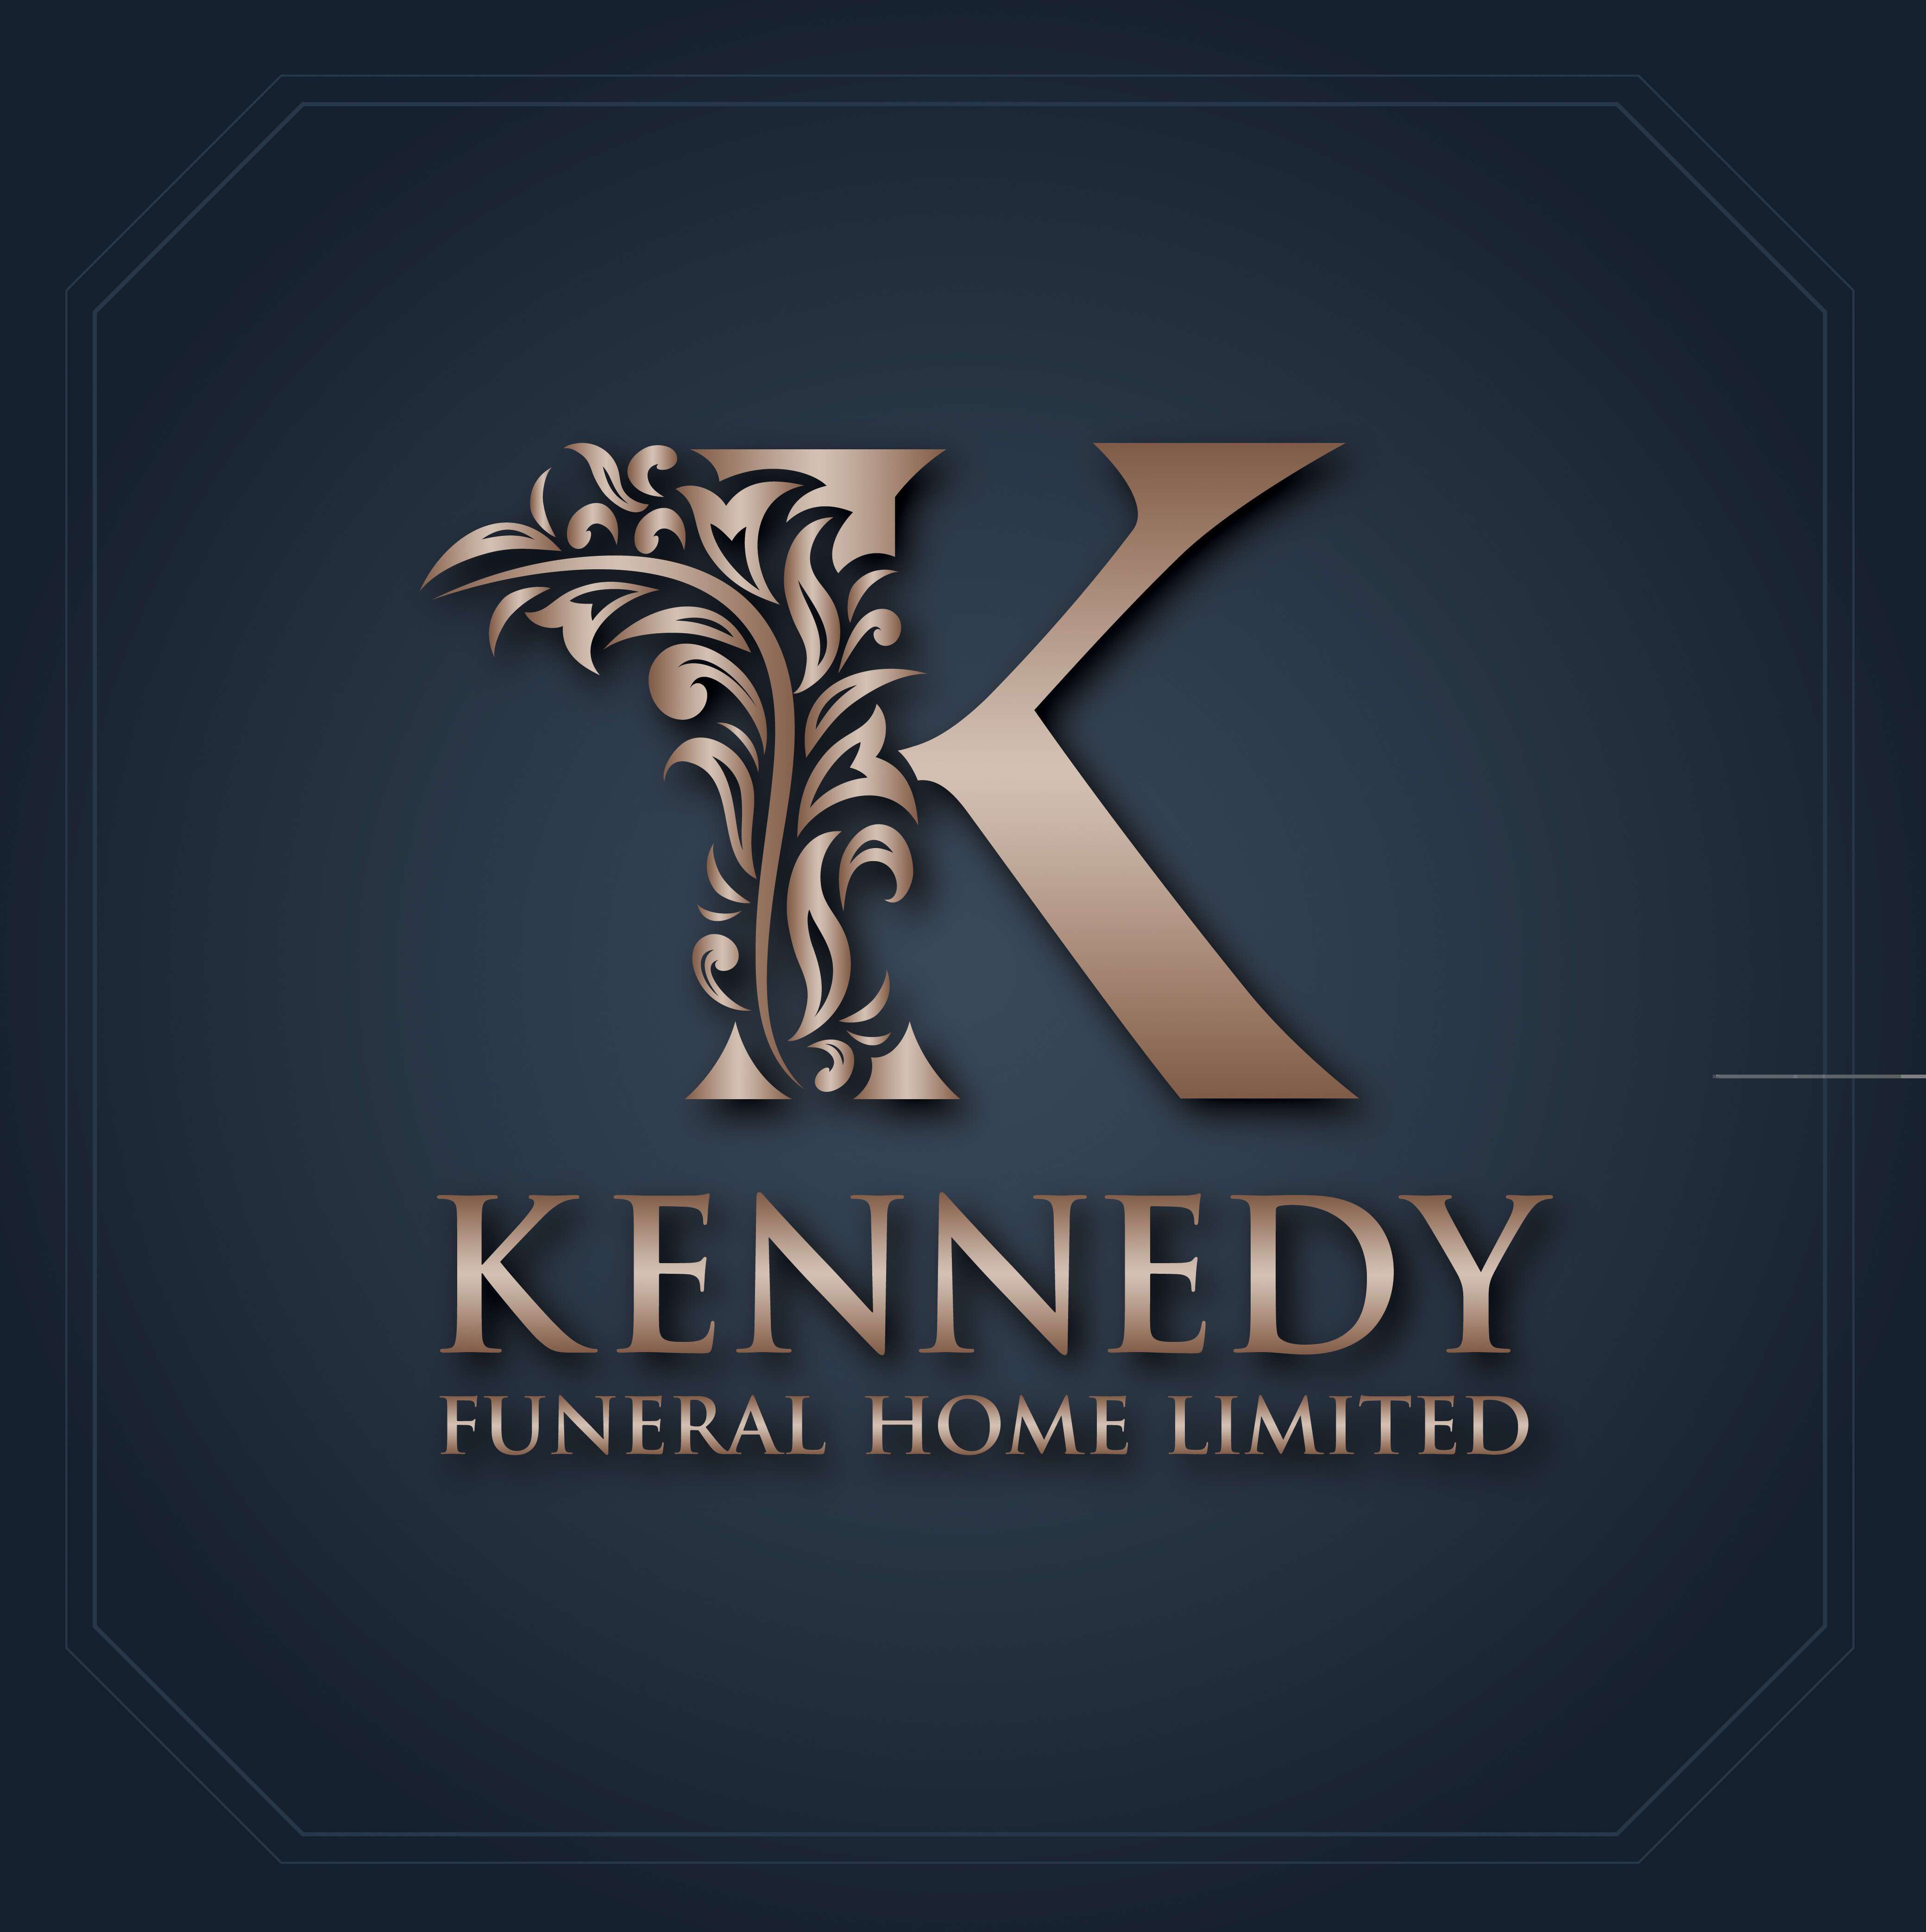 Kennedy Funeral Home